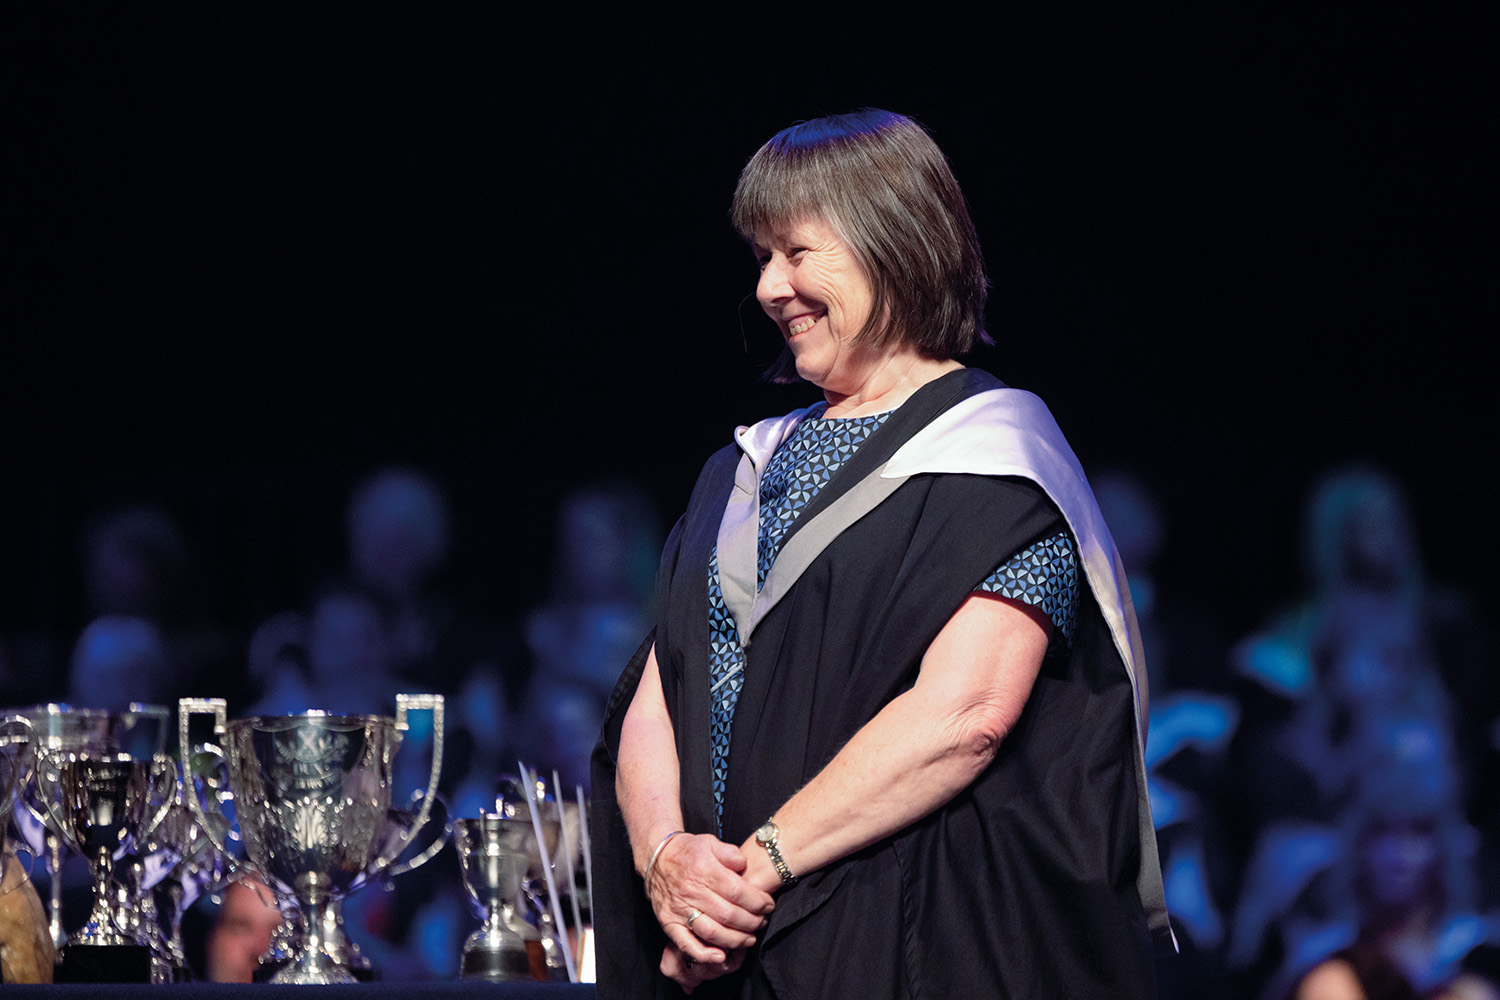 Virginia Simcock, St Andrew's College former Head of Modern Languages, being awarded the Marily Scanlon Award at the 2023 Prizegiving.